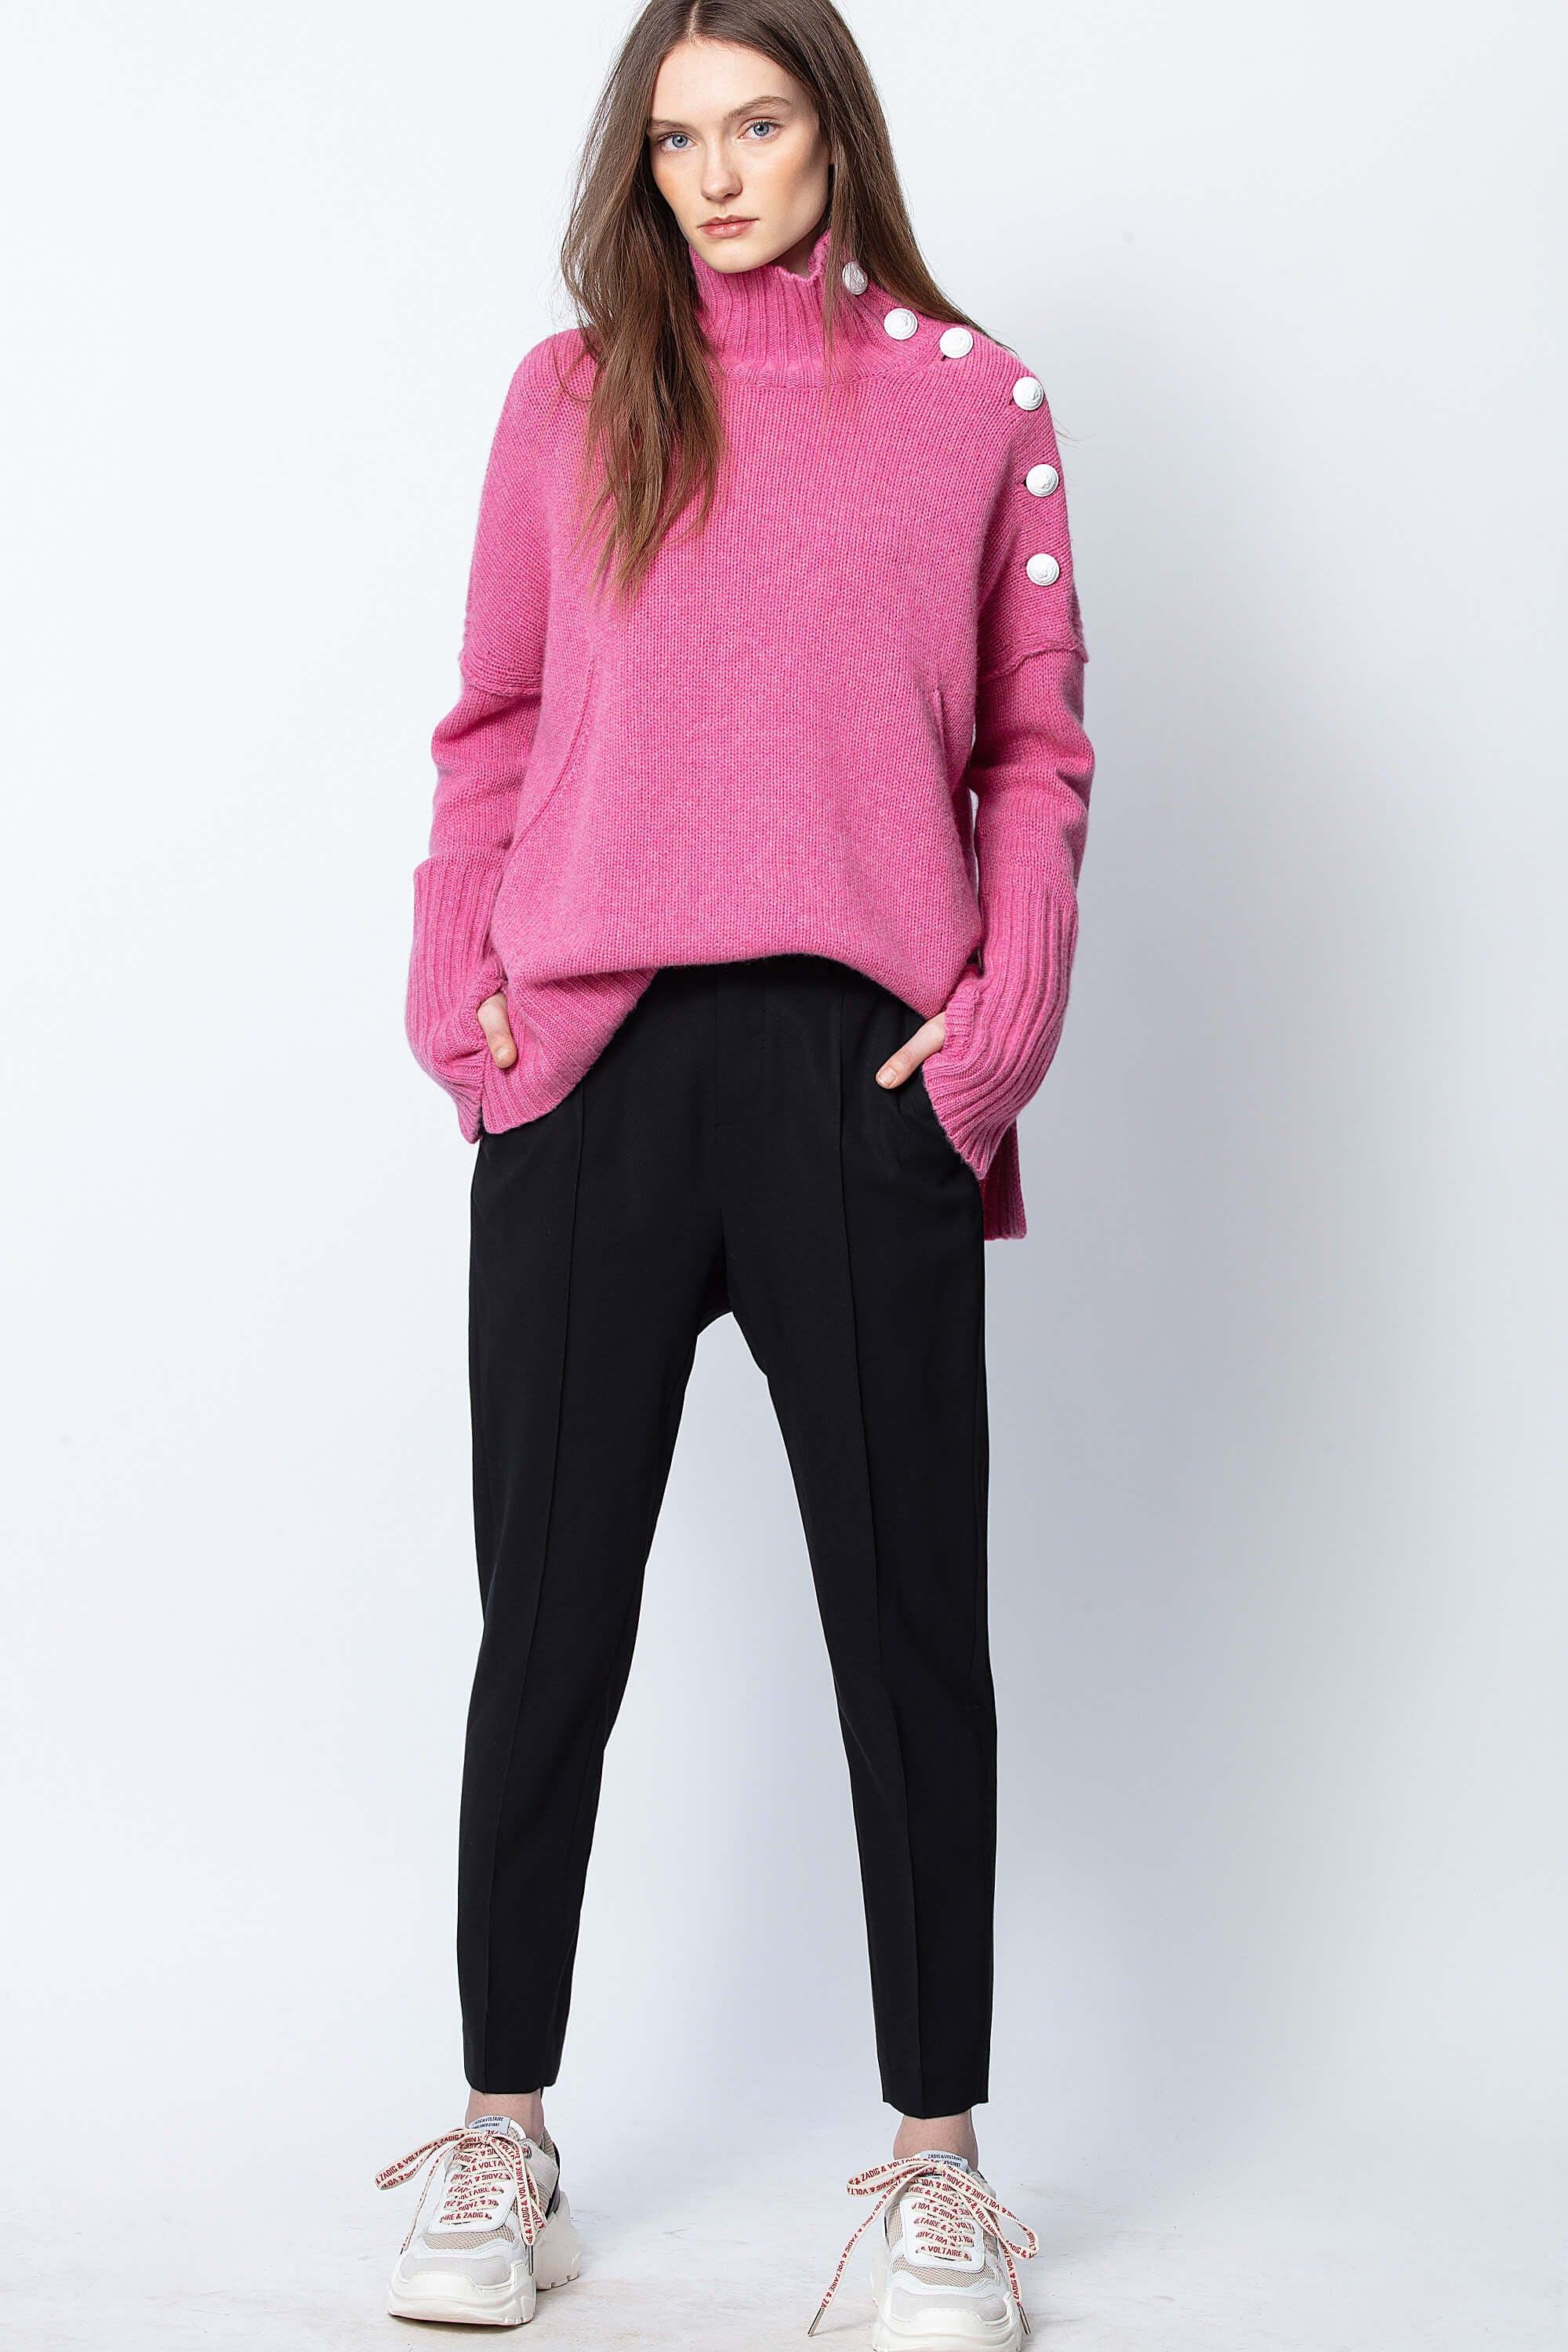 Zadig & Voltaire Cashmere Alma Cachemire Sweater in Pink - Lyst